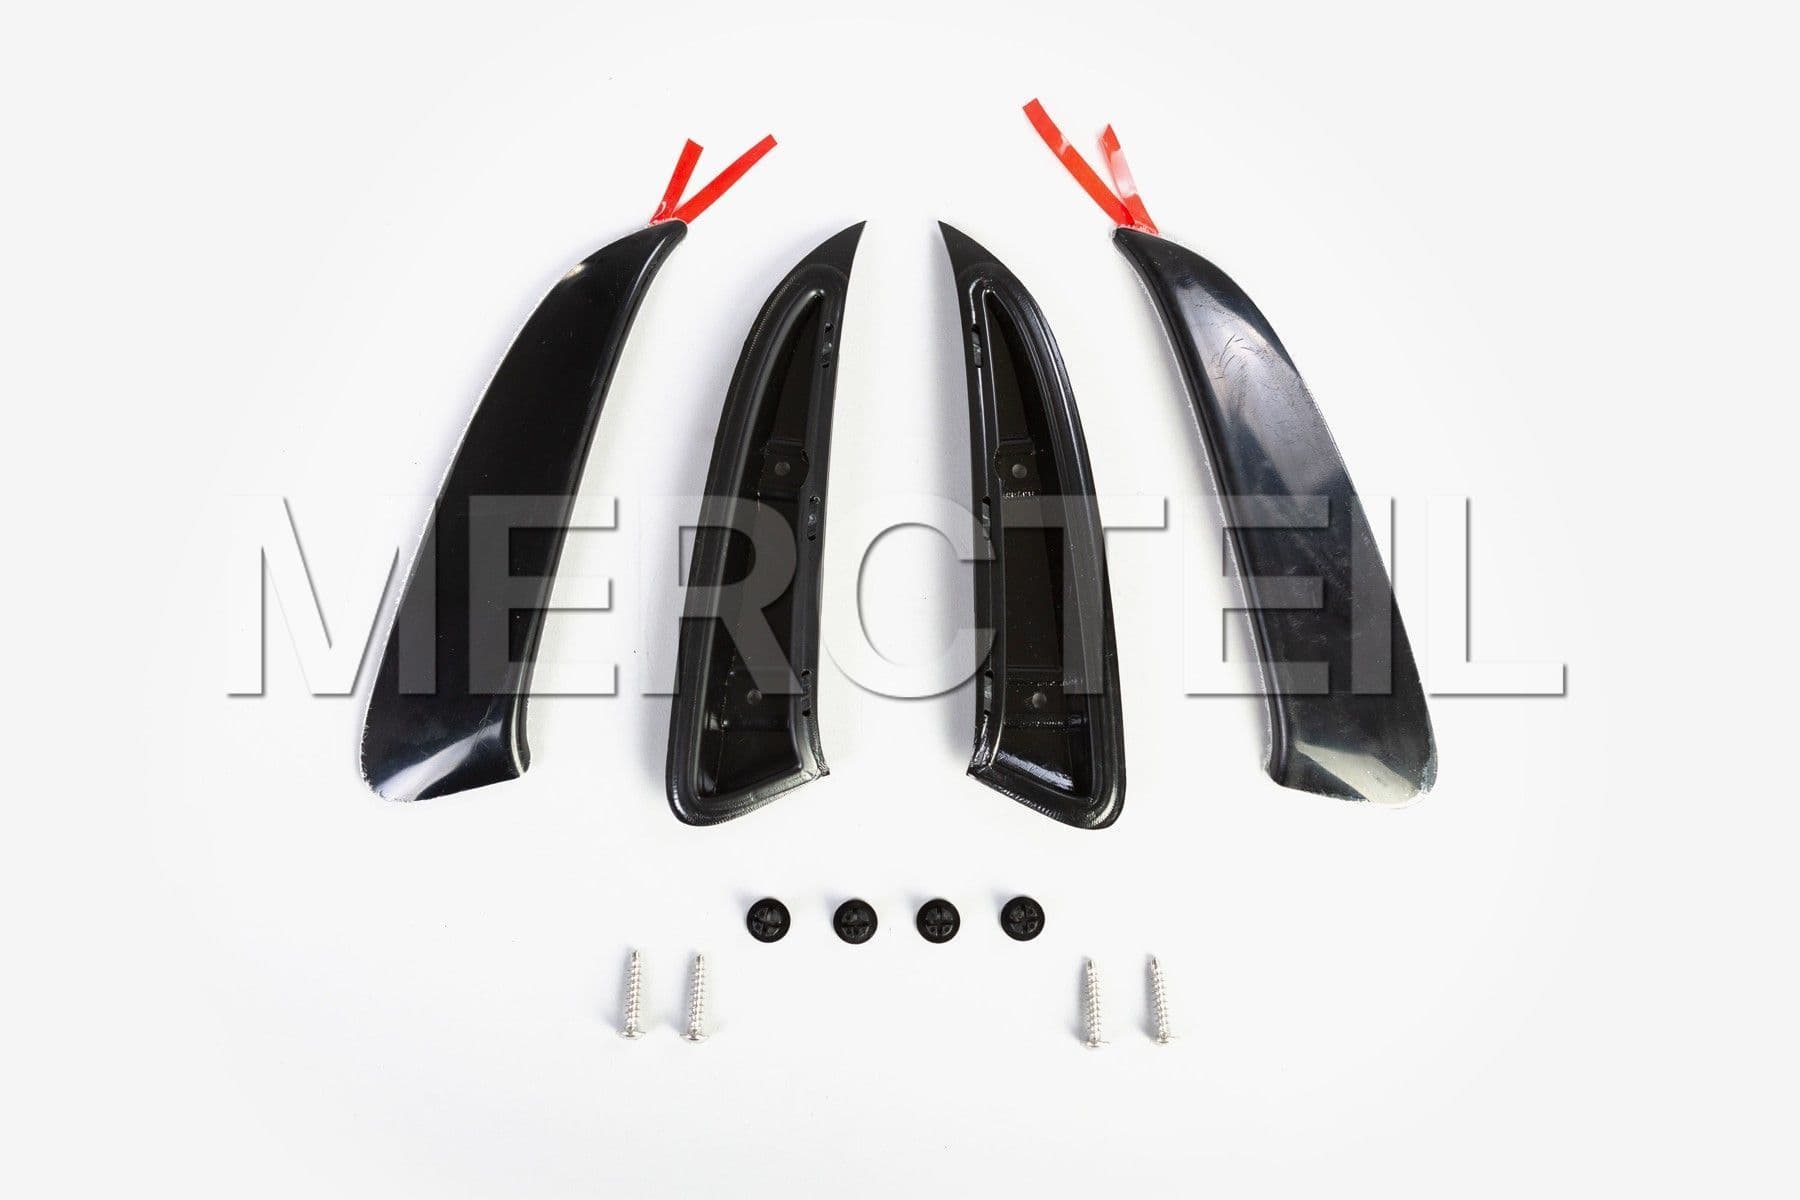 C Class Wagon AMG Flicks Black S205 Genuine Mercedes AMG (part number: A2058809703)